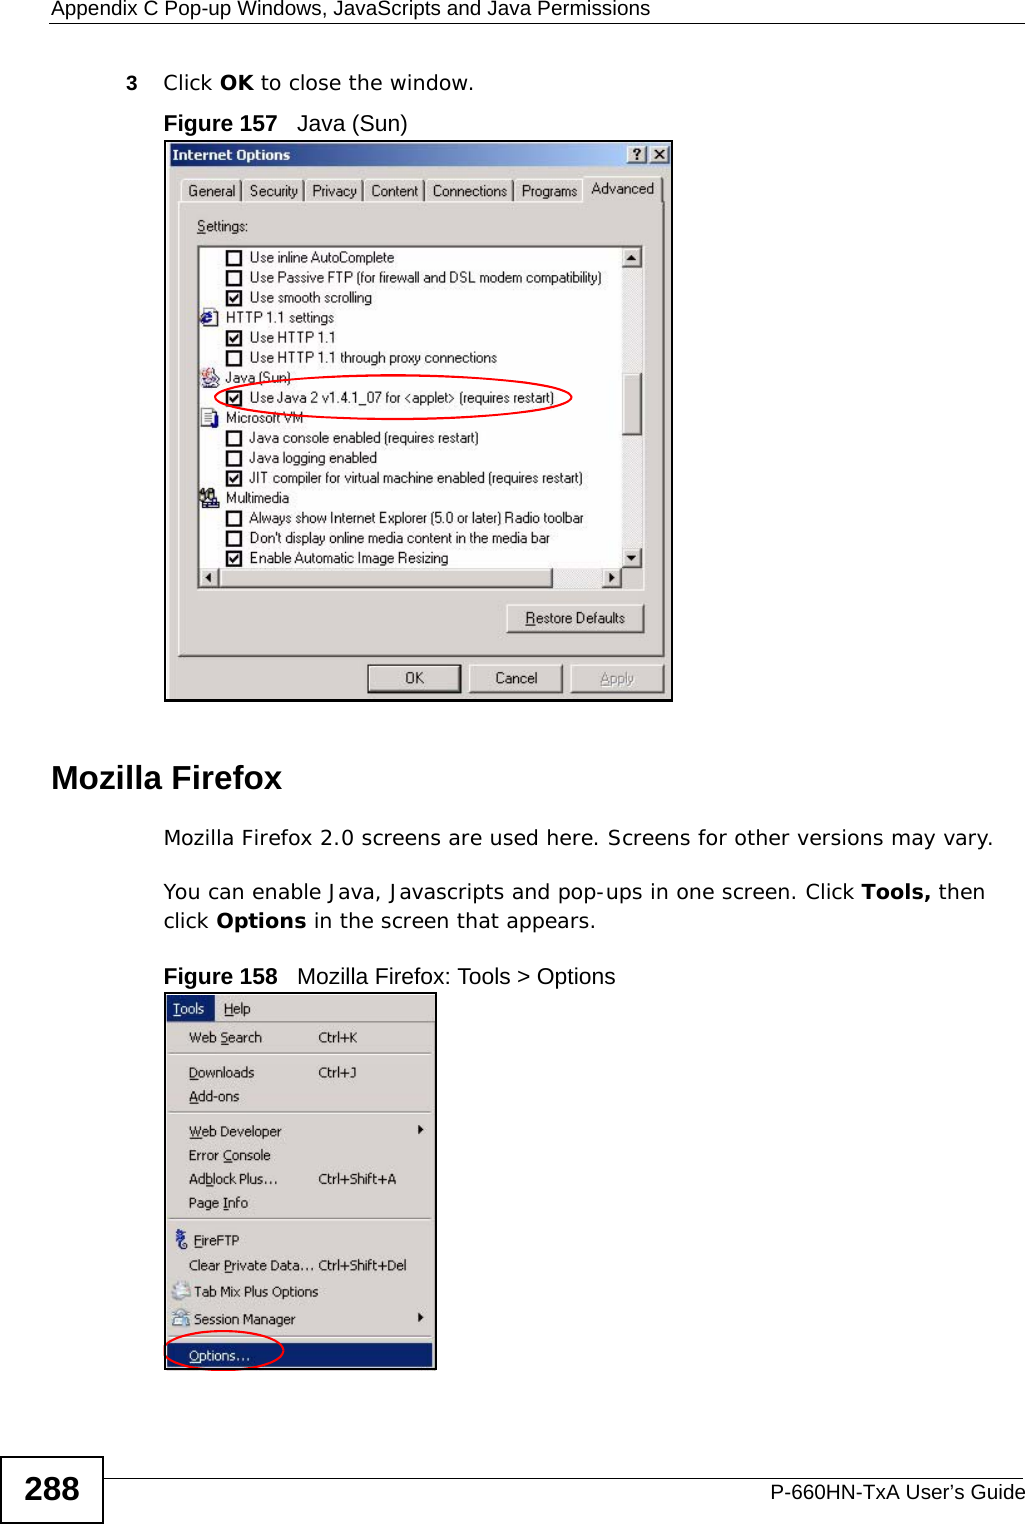 Appendix C Pop-up Windows, JavaScripts and Java PermissionsP-660HN-TxA User’s Guide2883Click OK to close the window.Figure 157   Java (Sun)Mozilla FirefoxMozilla Firefox 2.0 screens are used here. Screens for other versions may vary. You can enable Java, Javascripts and pop-ups in one screen. Click Tools, then click Options in the screen that appears.Figure 158   Mozilla Firefox: Tools &gt; Options